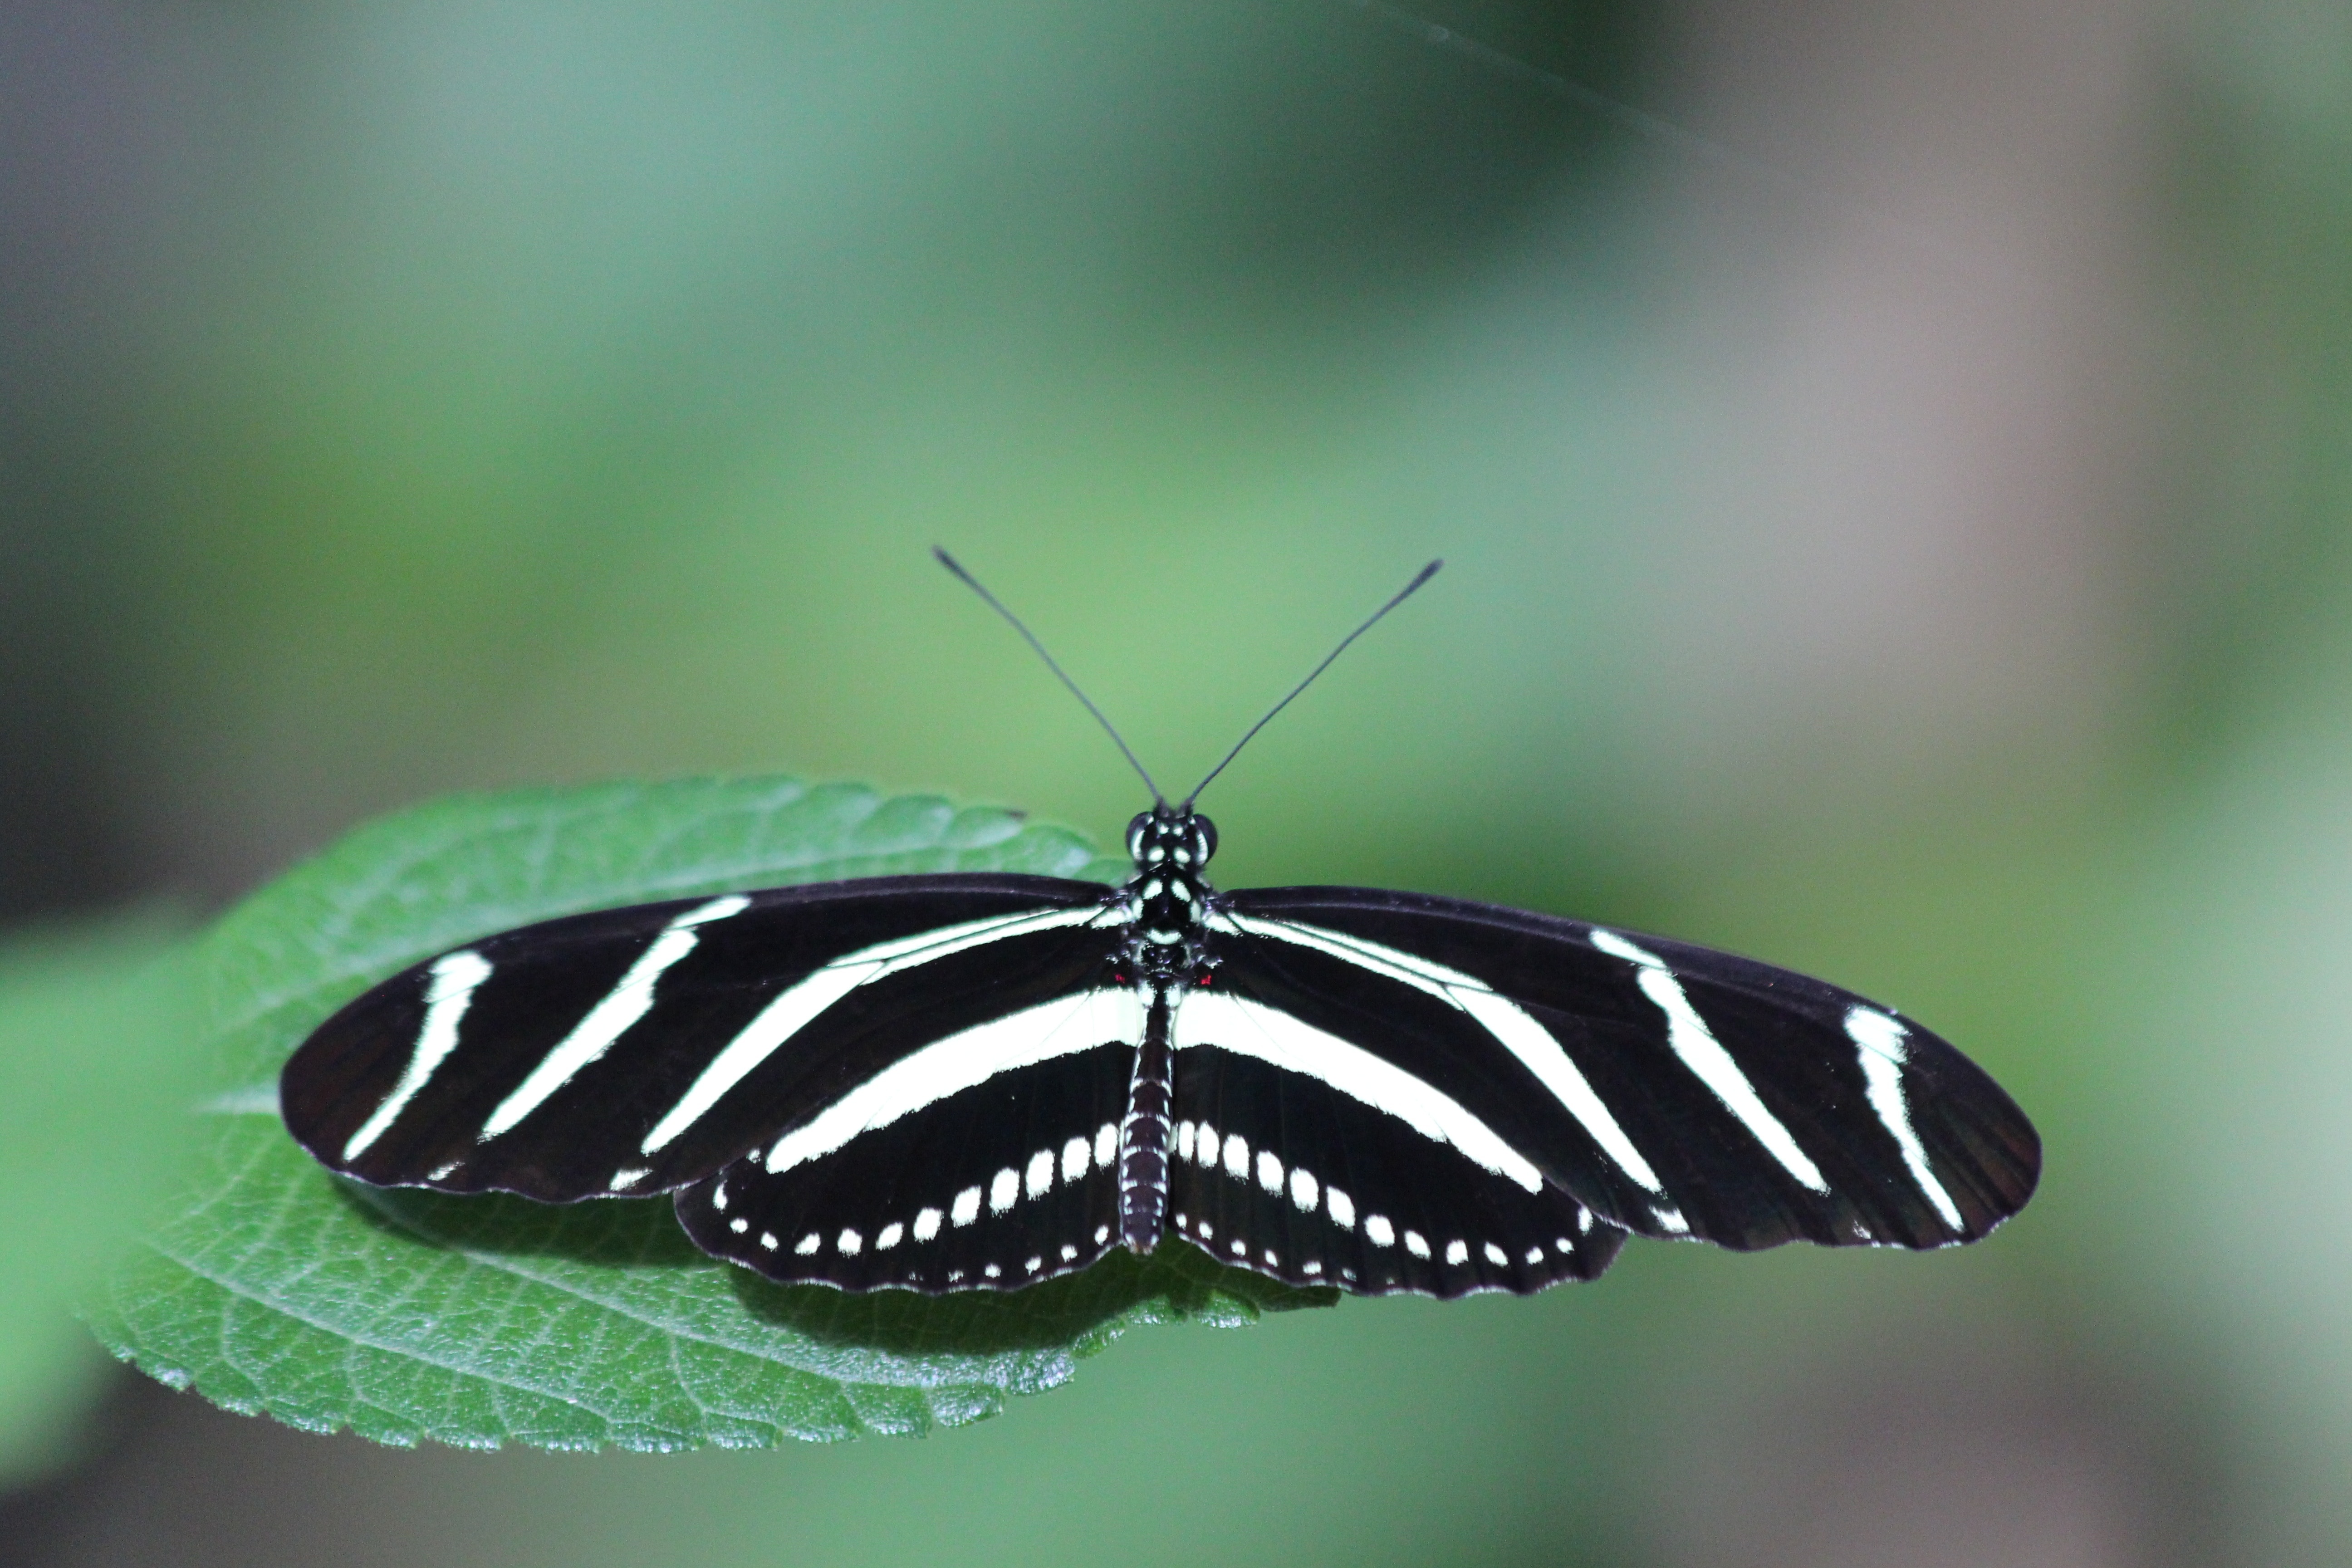 zebra longwing butterfly on a green leaf close up focus photograph